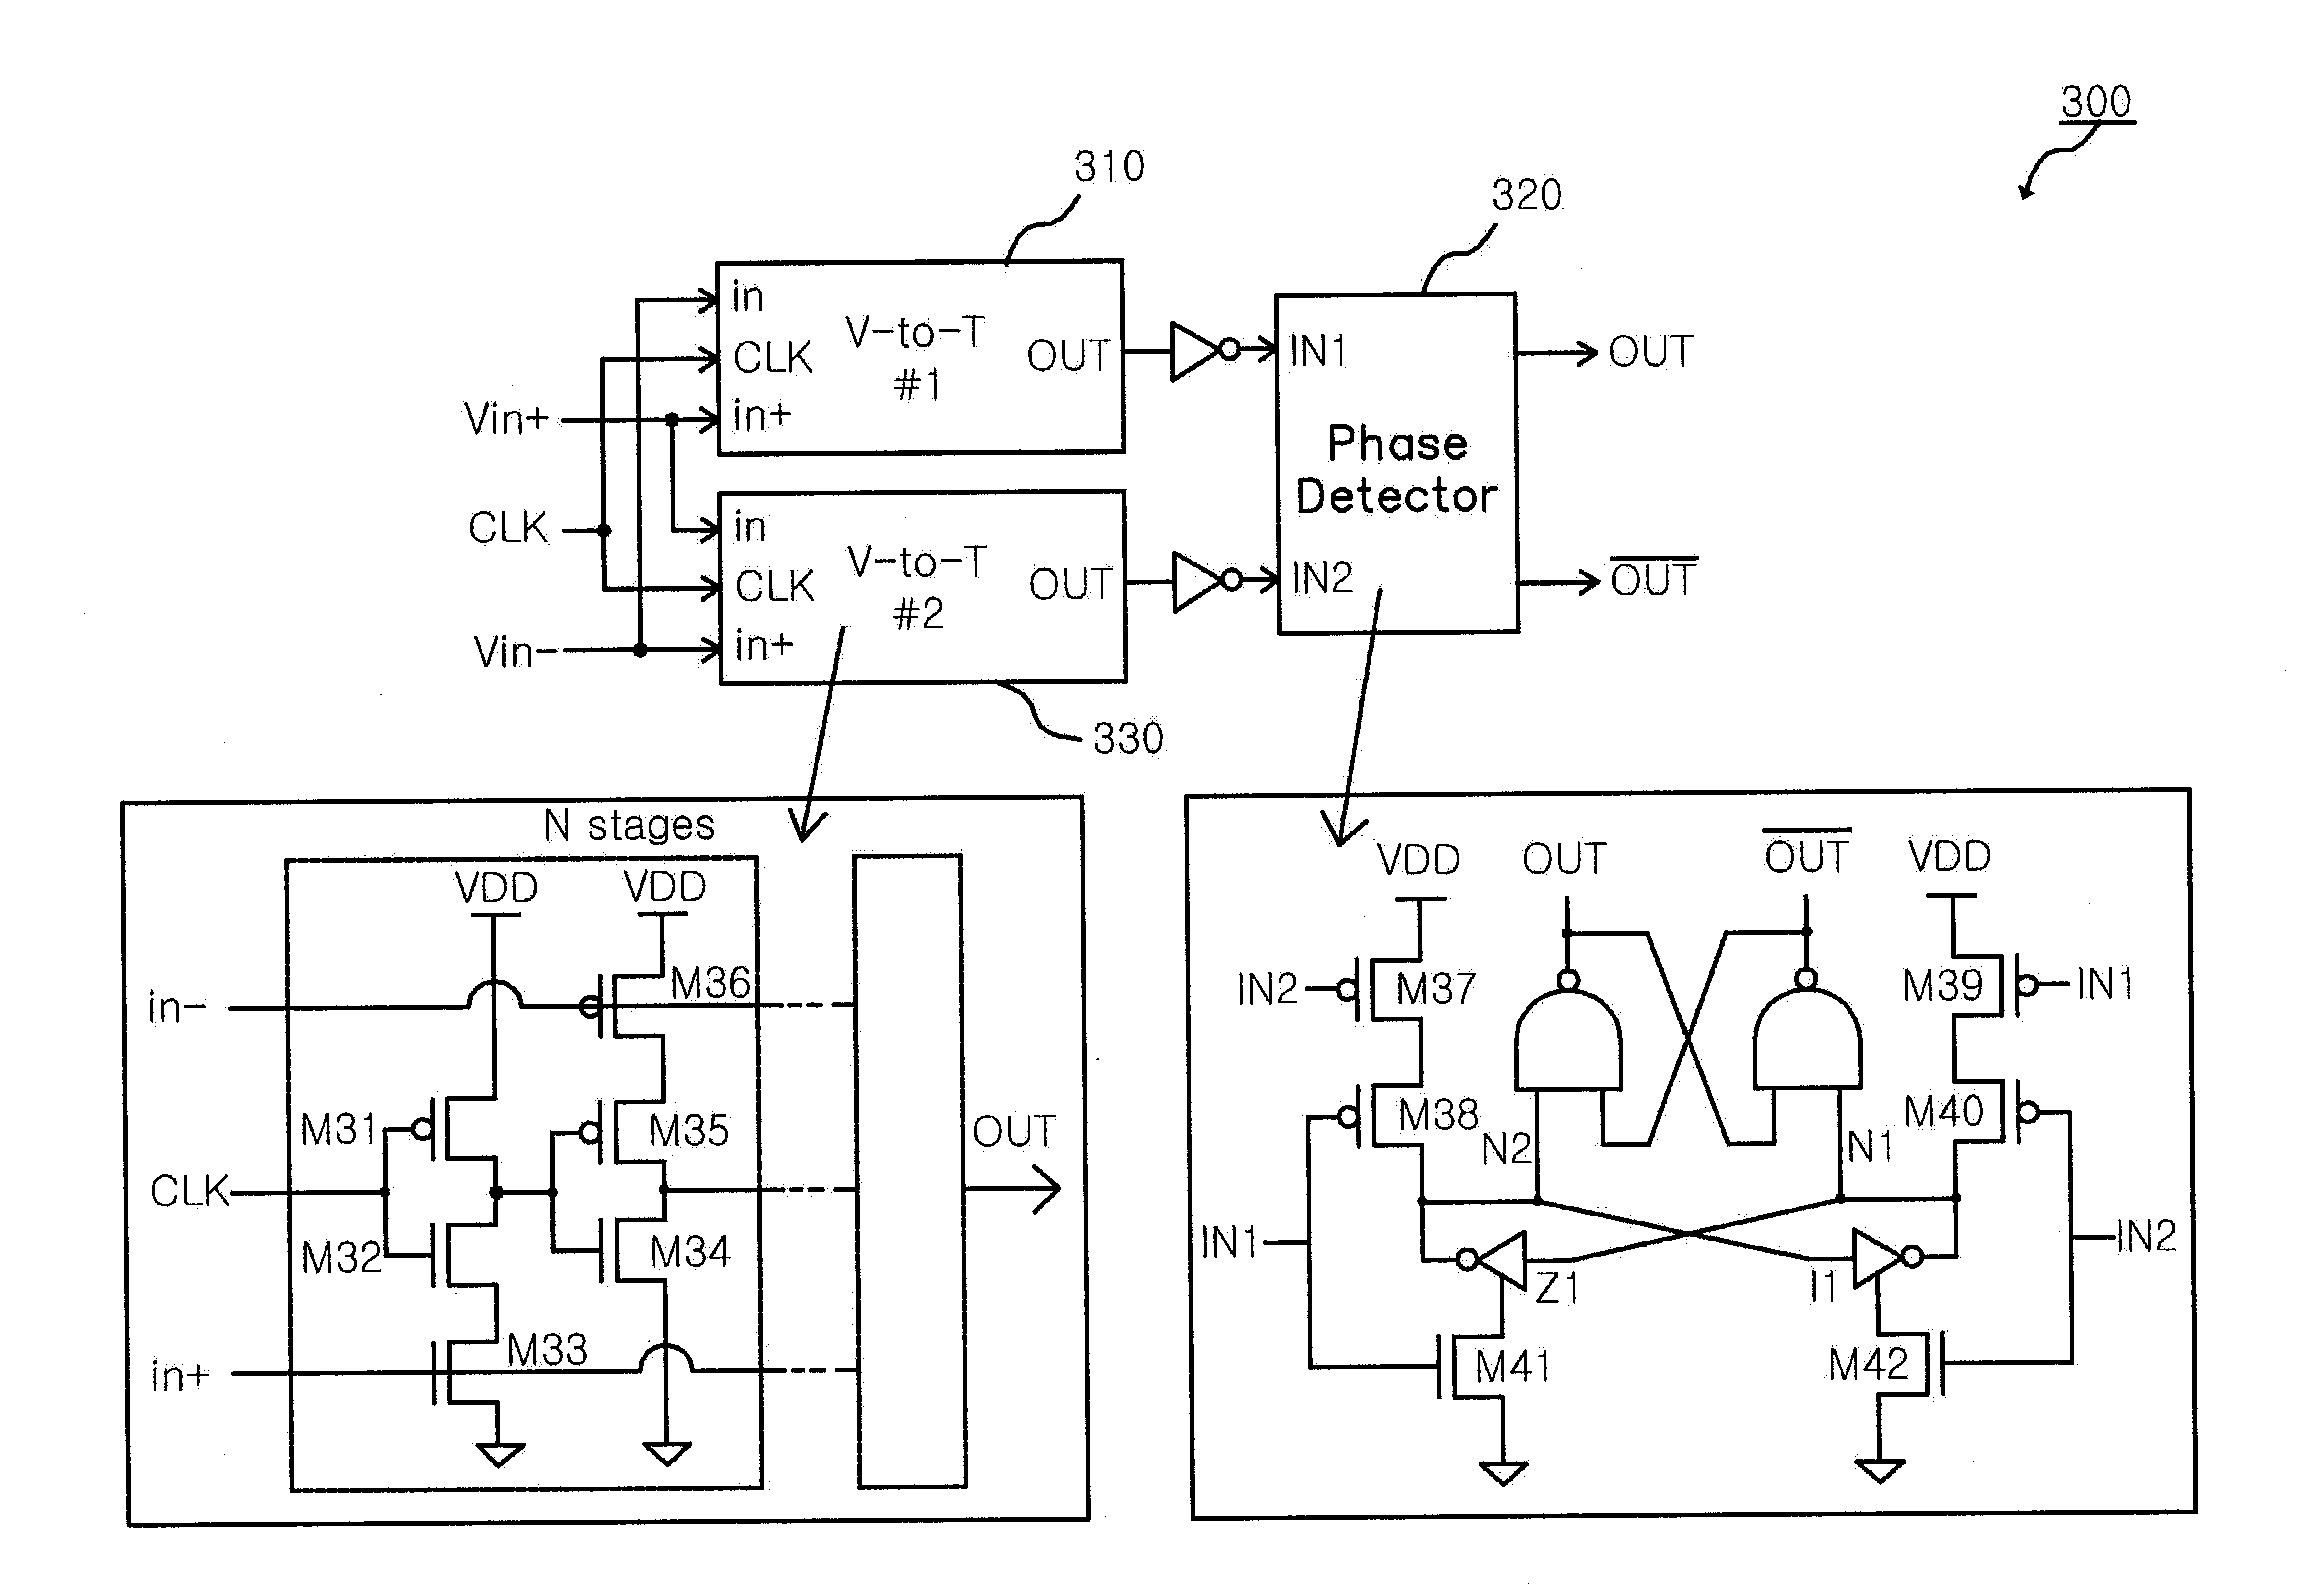 Time-domain voltage comparator for analog-to-digital converter